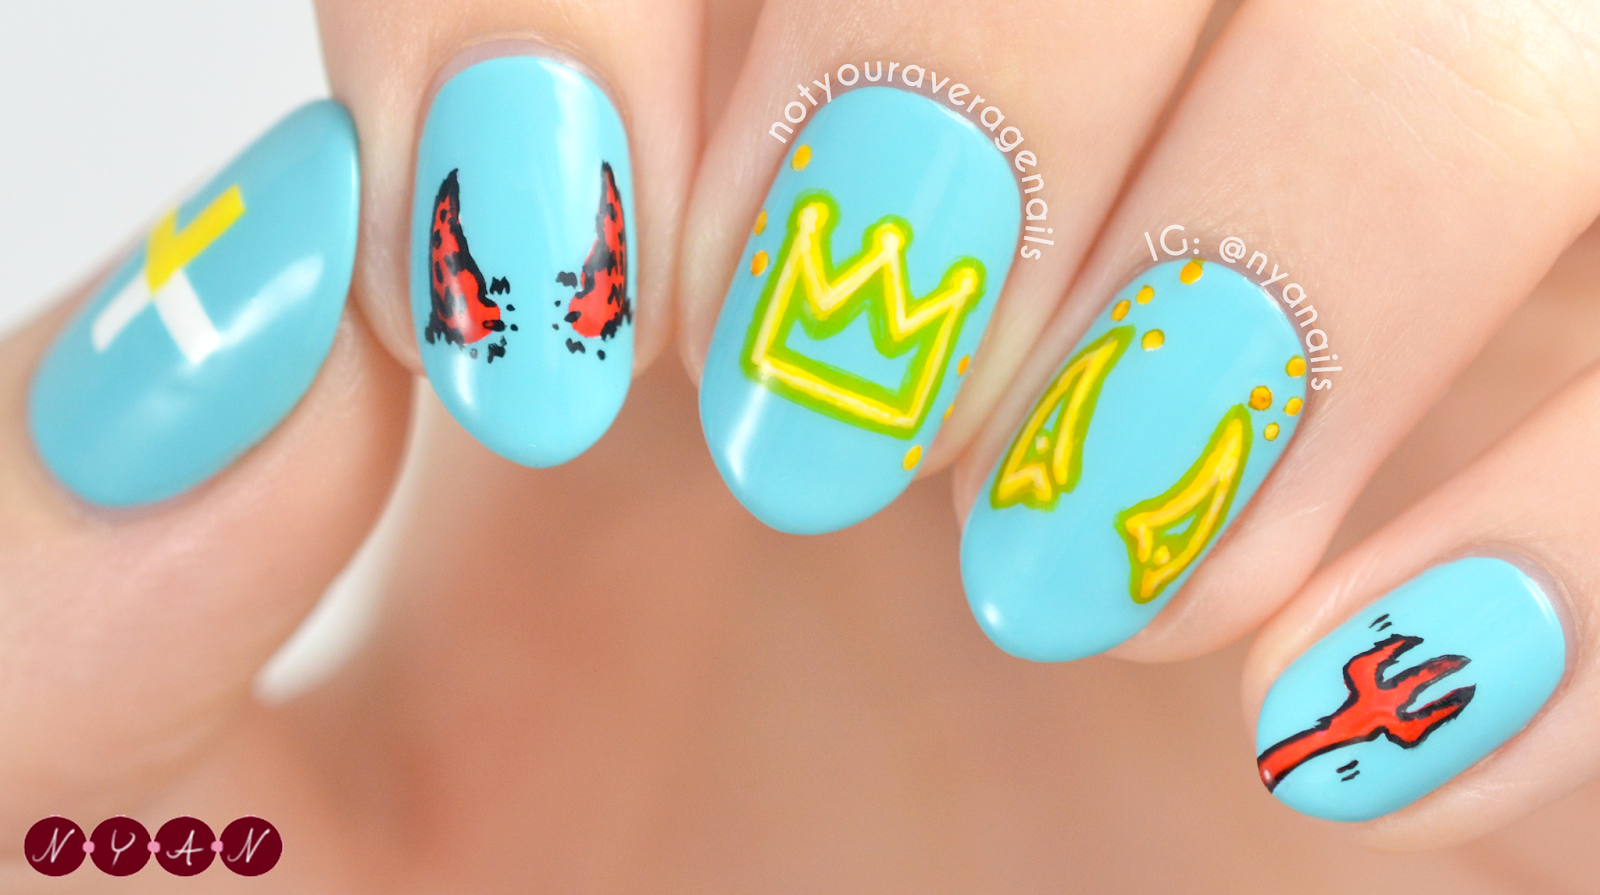 2. "Elegant Crown Nail Art for Special Occasions" - wide 8